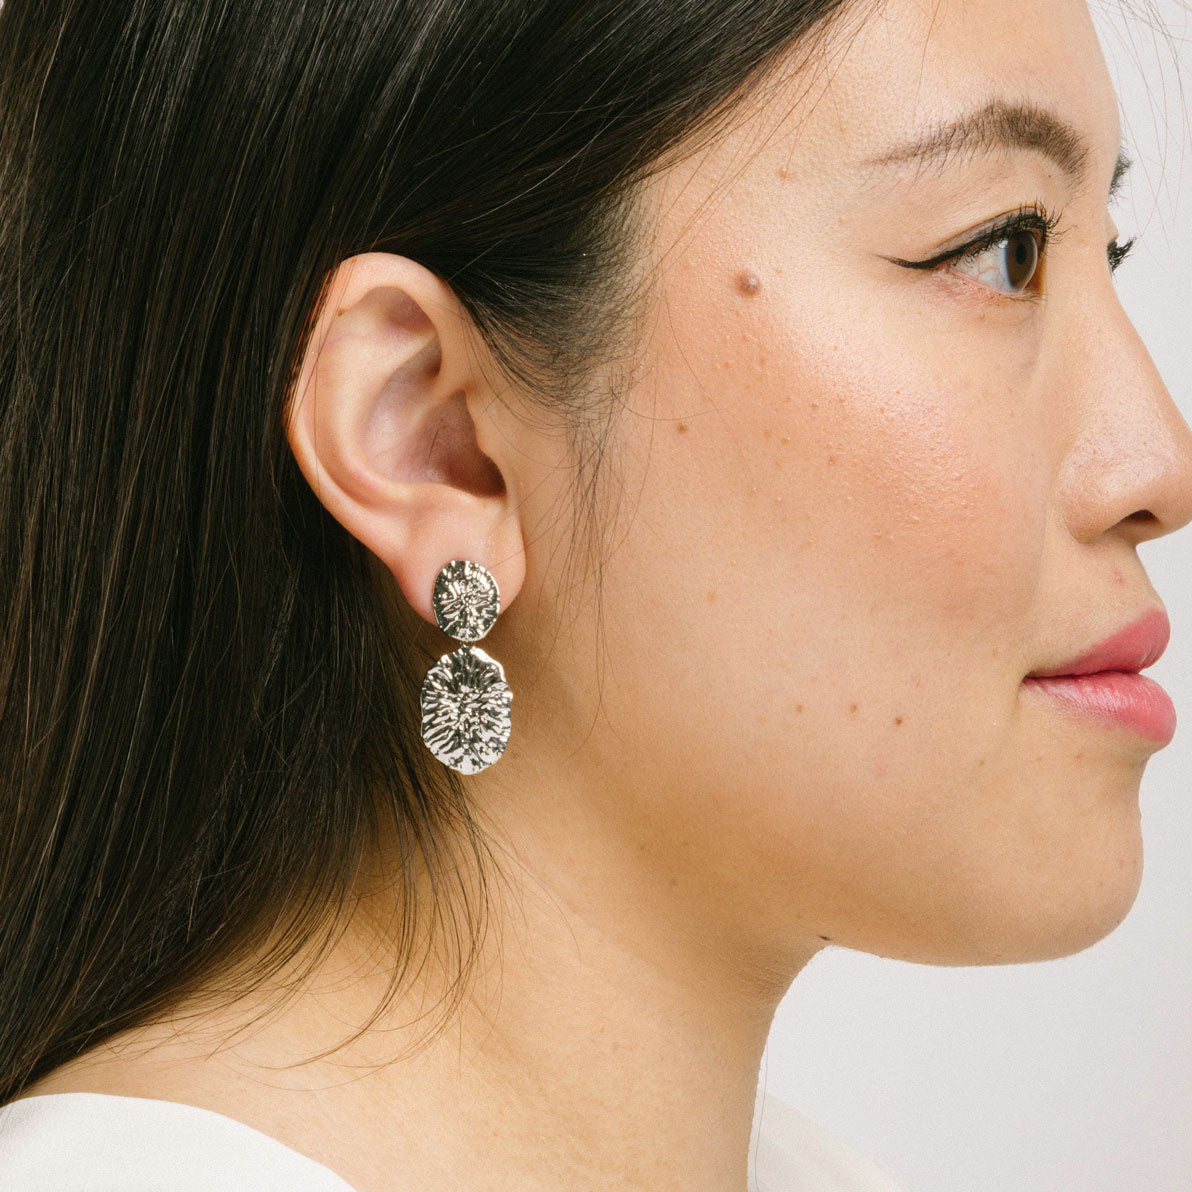 A model wearing the Daiquiri Drop Clip On Earrings in Silver feature a secure, padded clip-on closure ideal for all ear types, offering up to 12 hours of comfortable wear. Crafted from Zinc and Copper alloy, these earrings come as a single pair with removable rubber padding.